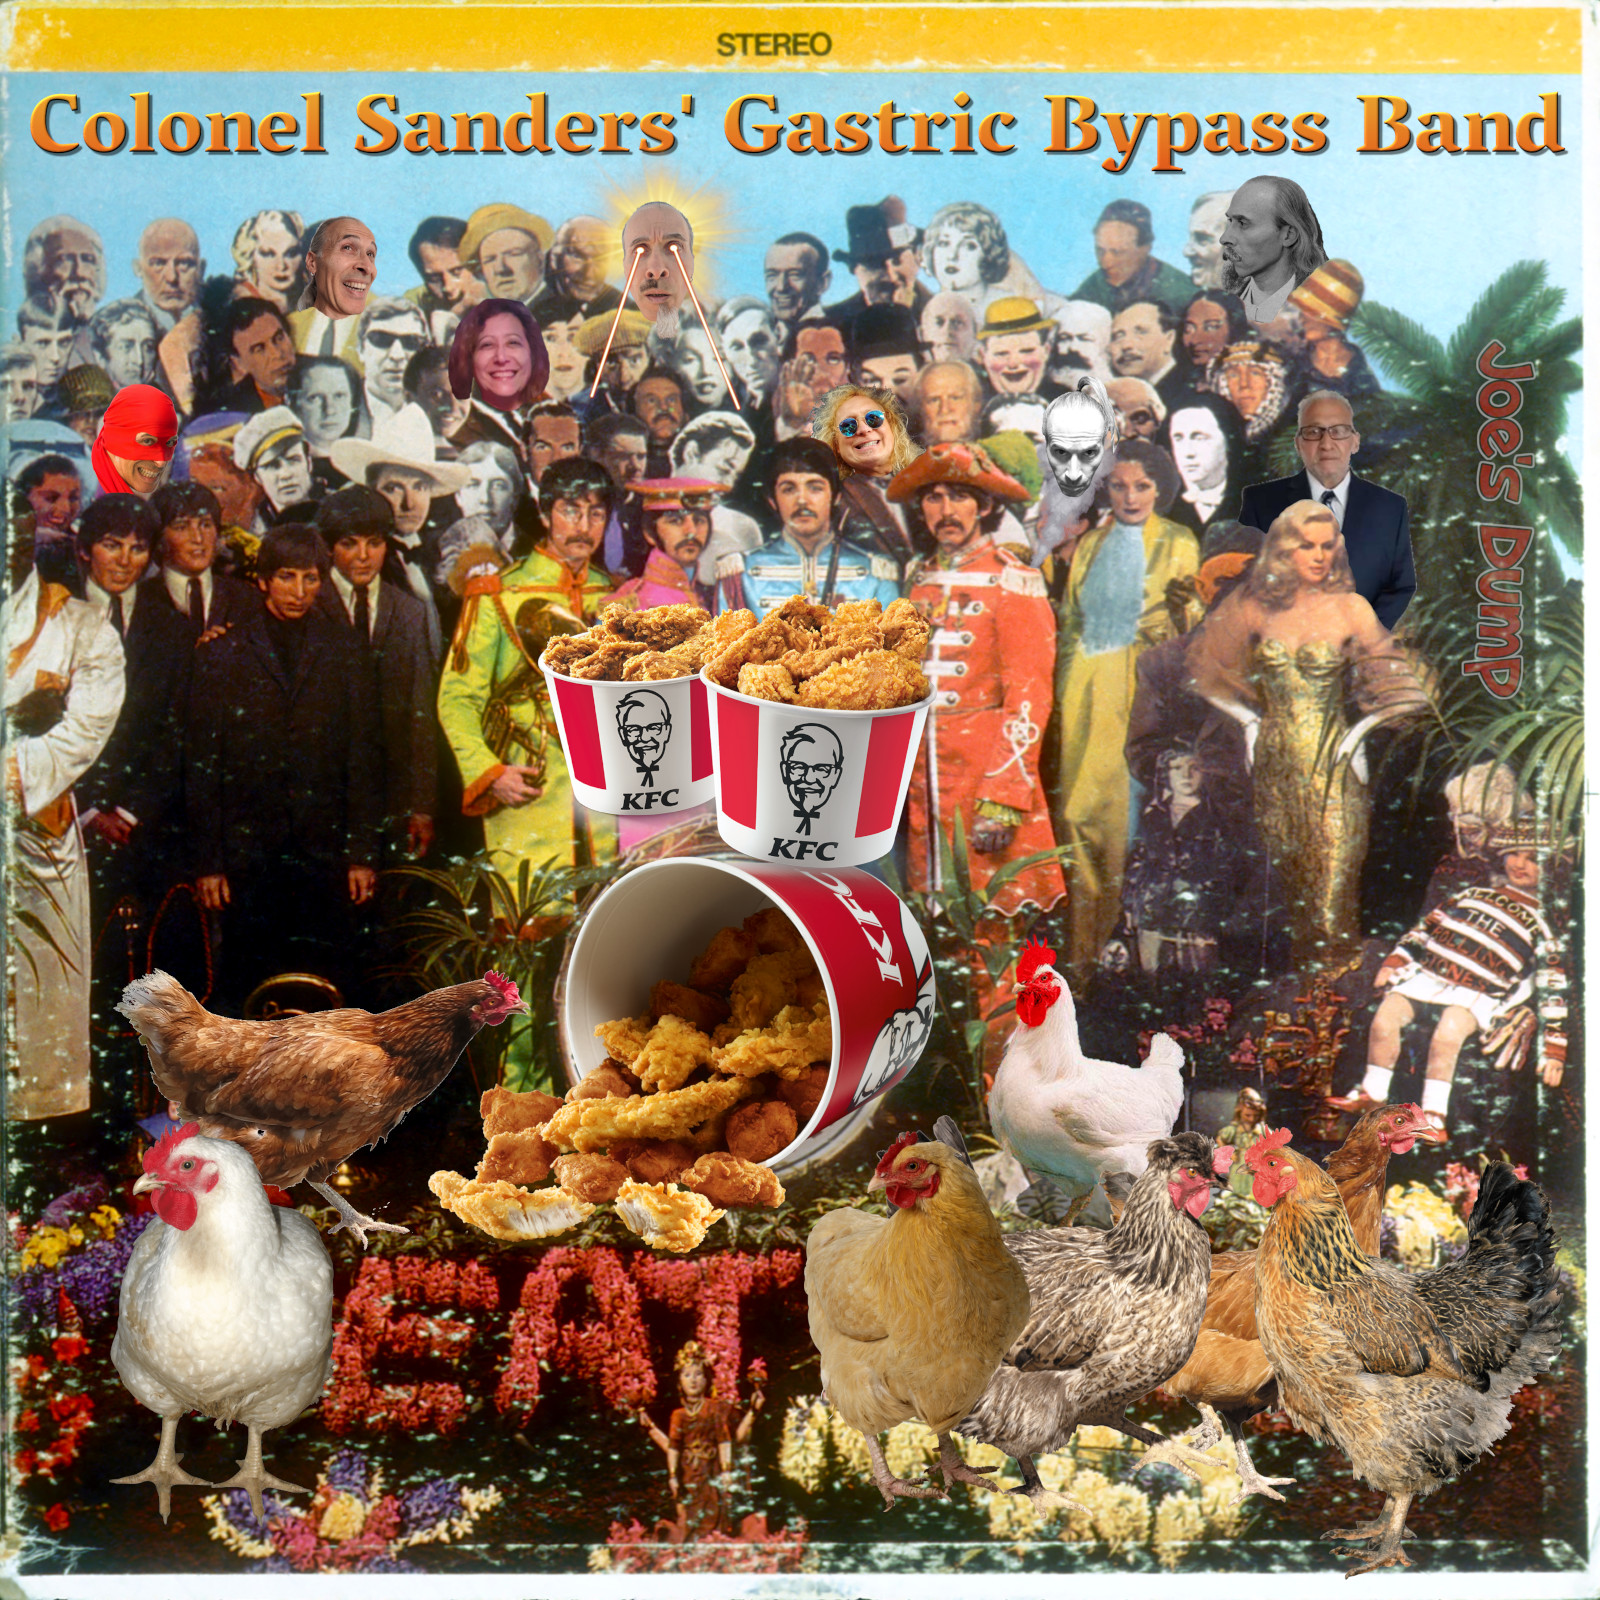 Colonel Sanders' Gastric Bypass Band